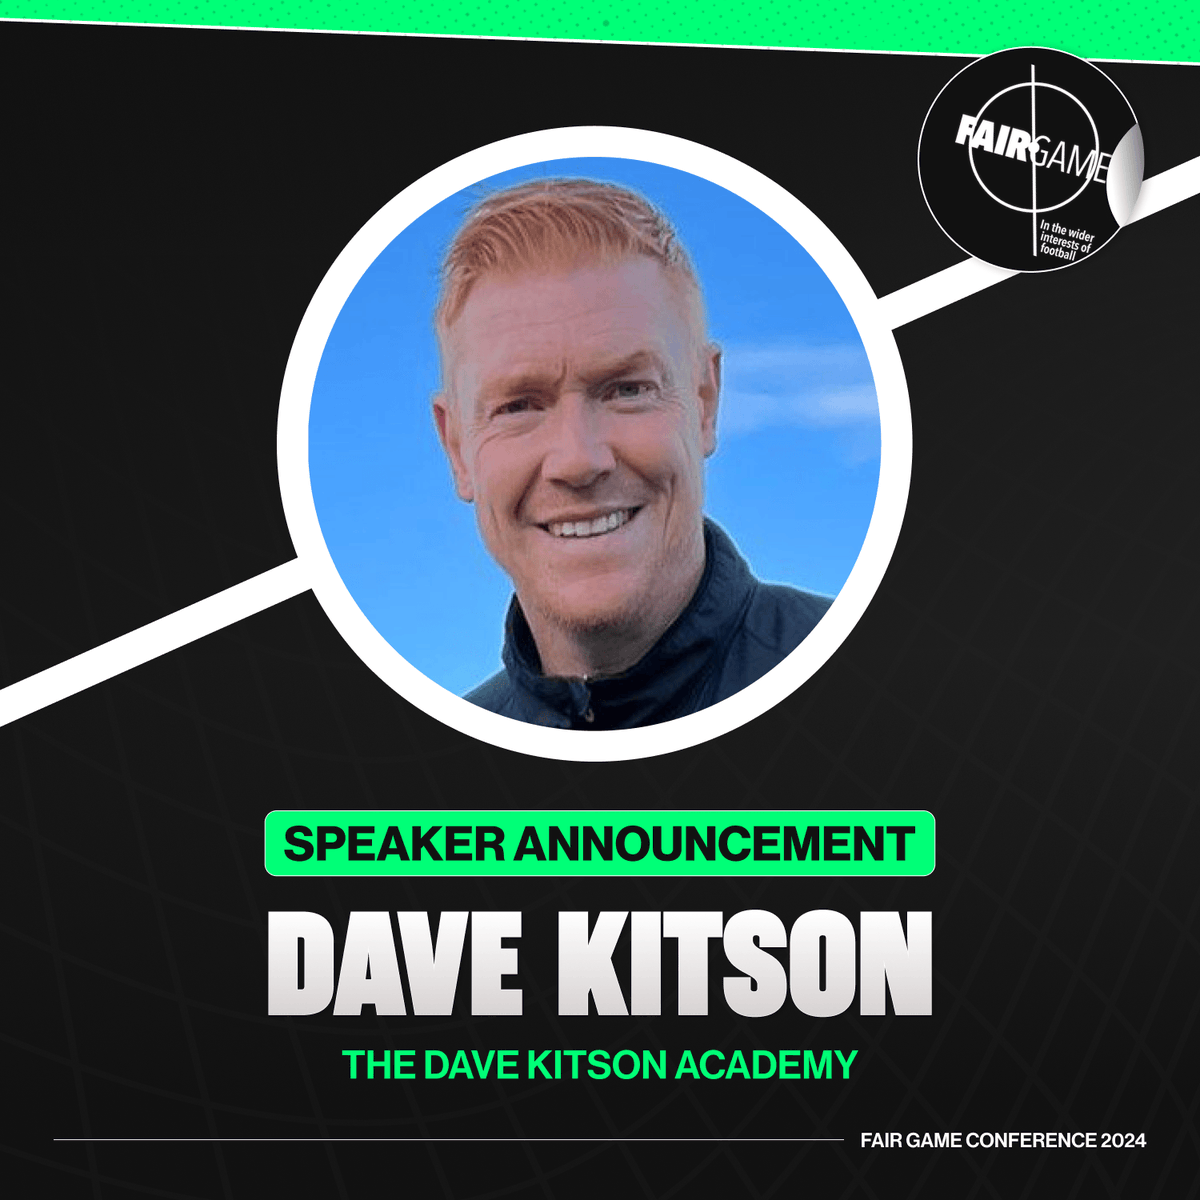 📢 Football's Financial Flow's Panel Also joining the financial flow talk will be former Premier League striker @DaveKitsonCoach to discuss how it impacts his former club @ReadingFC. #FGConference24 #readingfc